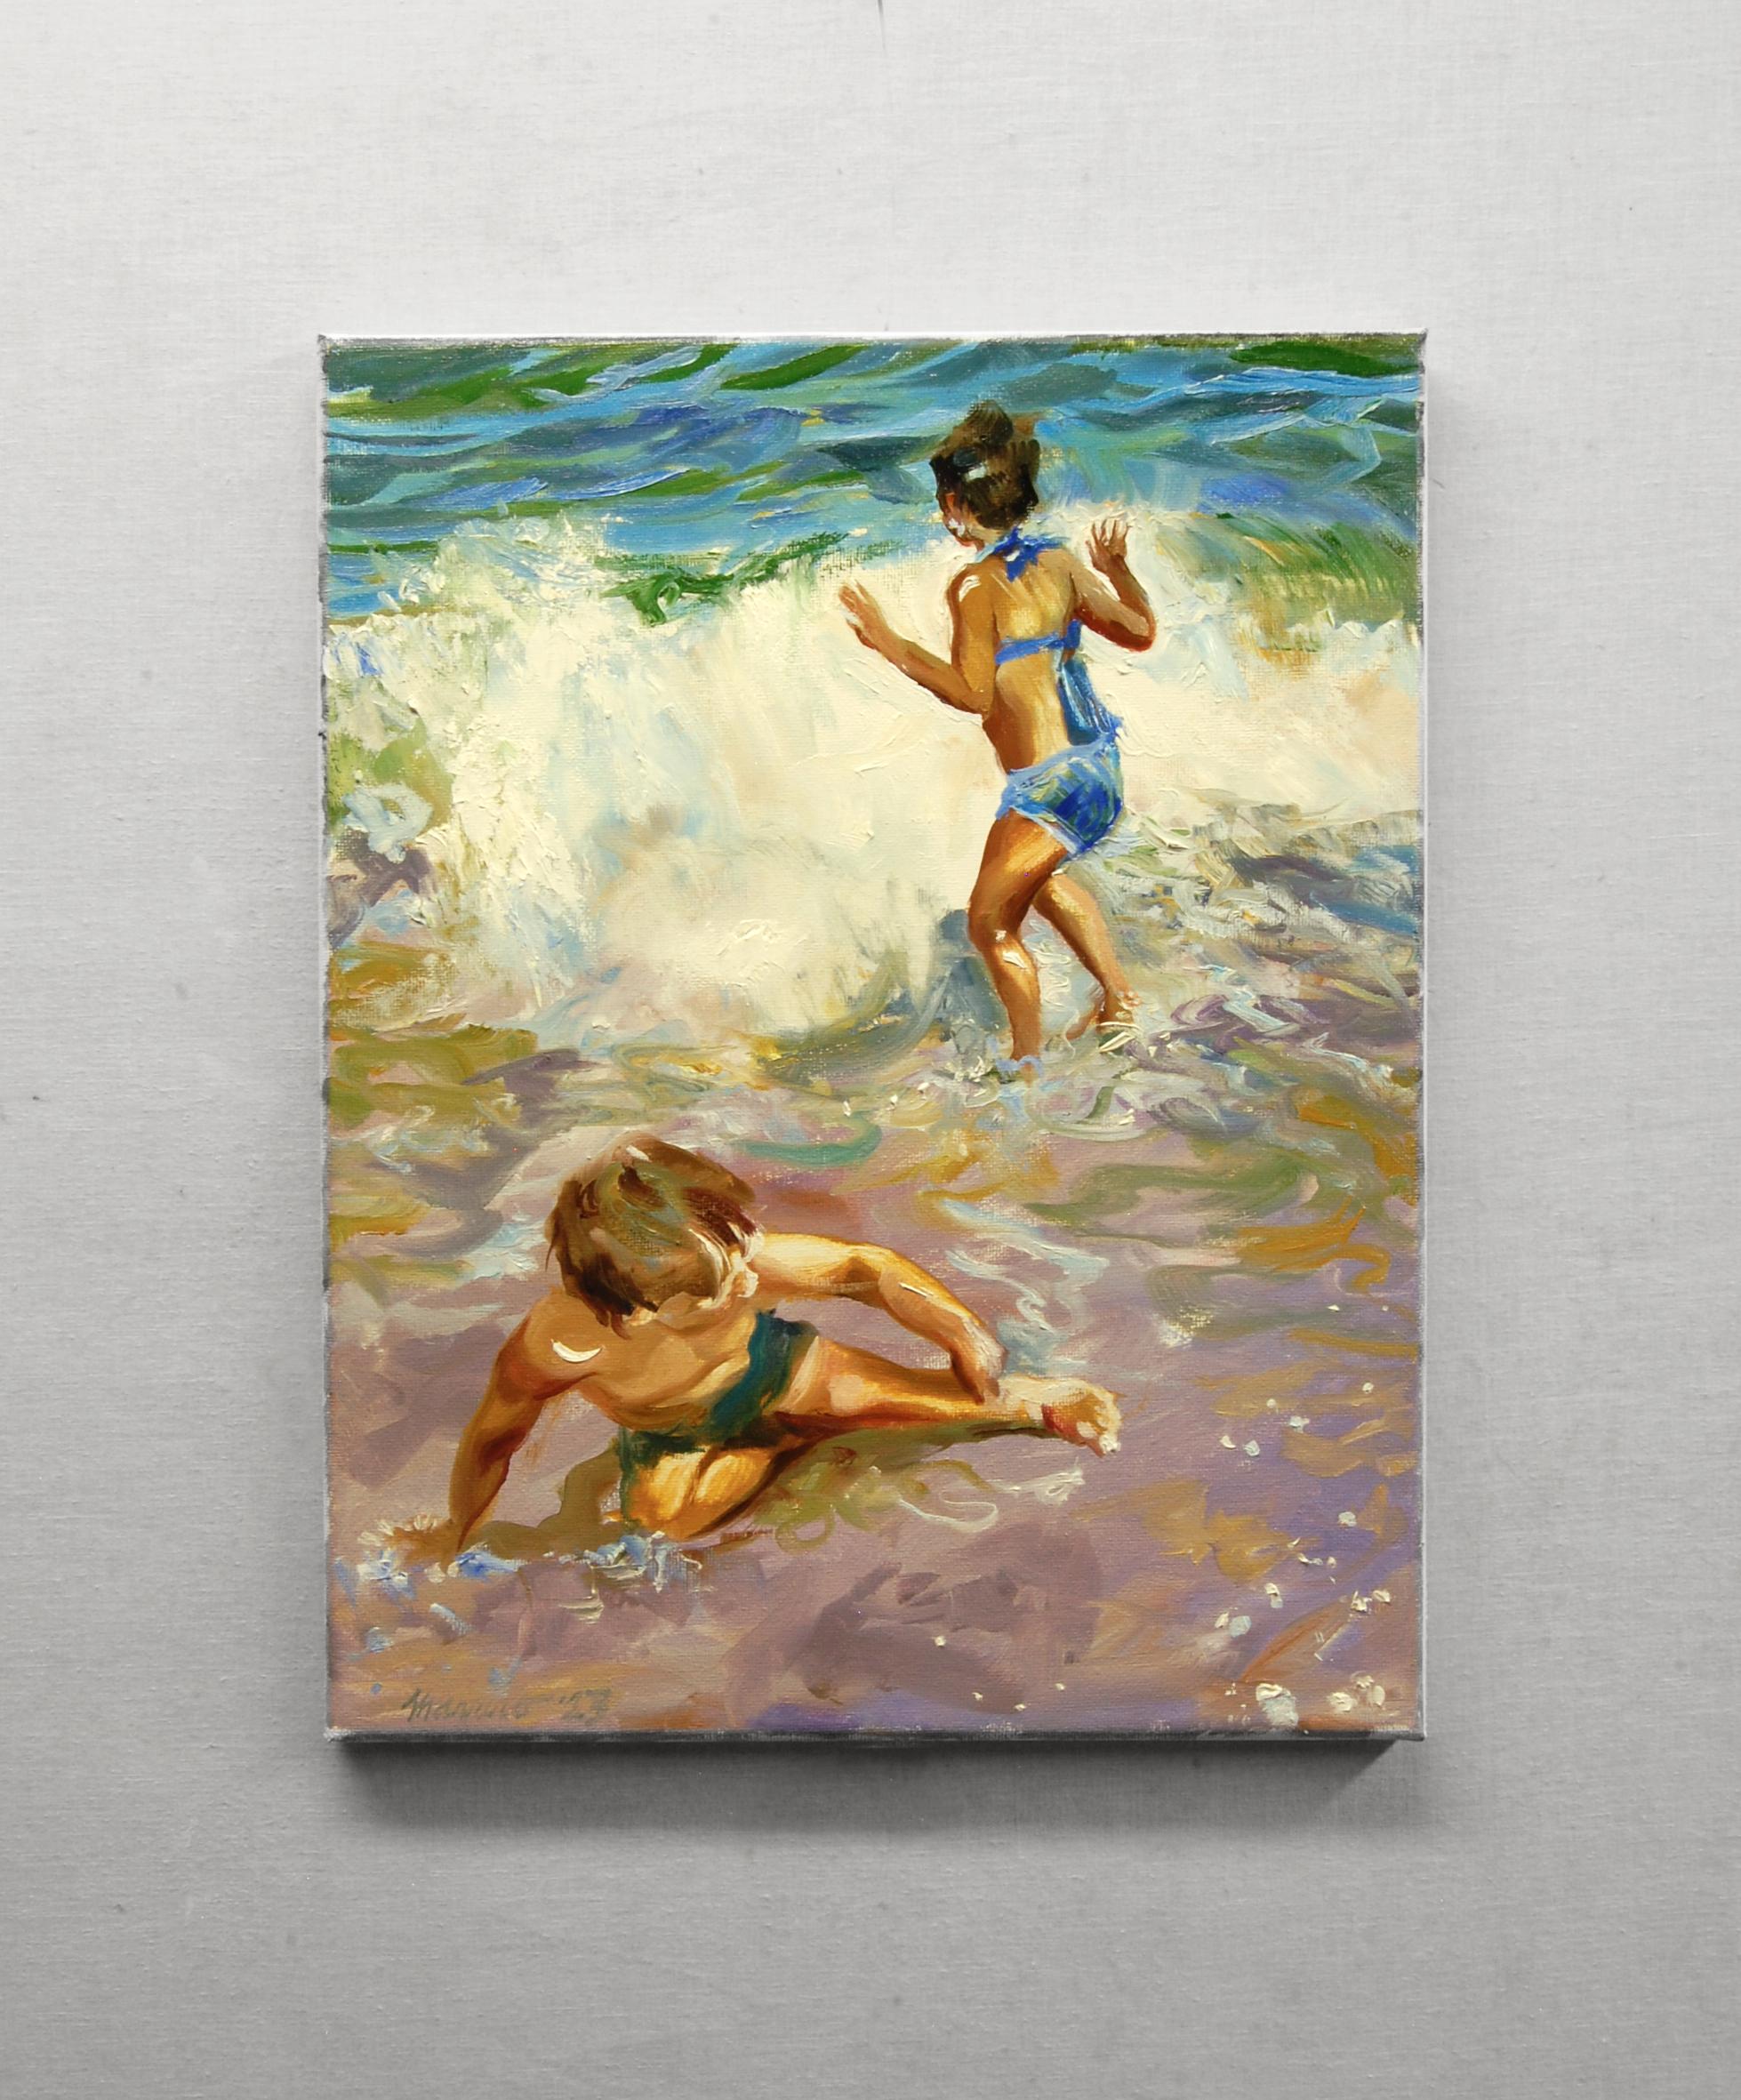 <p>Artist Comments<br>Artist Onelio Marrero depicts two carefree children playing in the surf. Part of a series of summer paintings that explores the joyful spirit of youth. His execution gives evidence of the influence of Sorolla's lighthearted